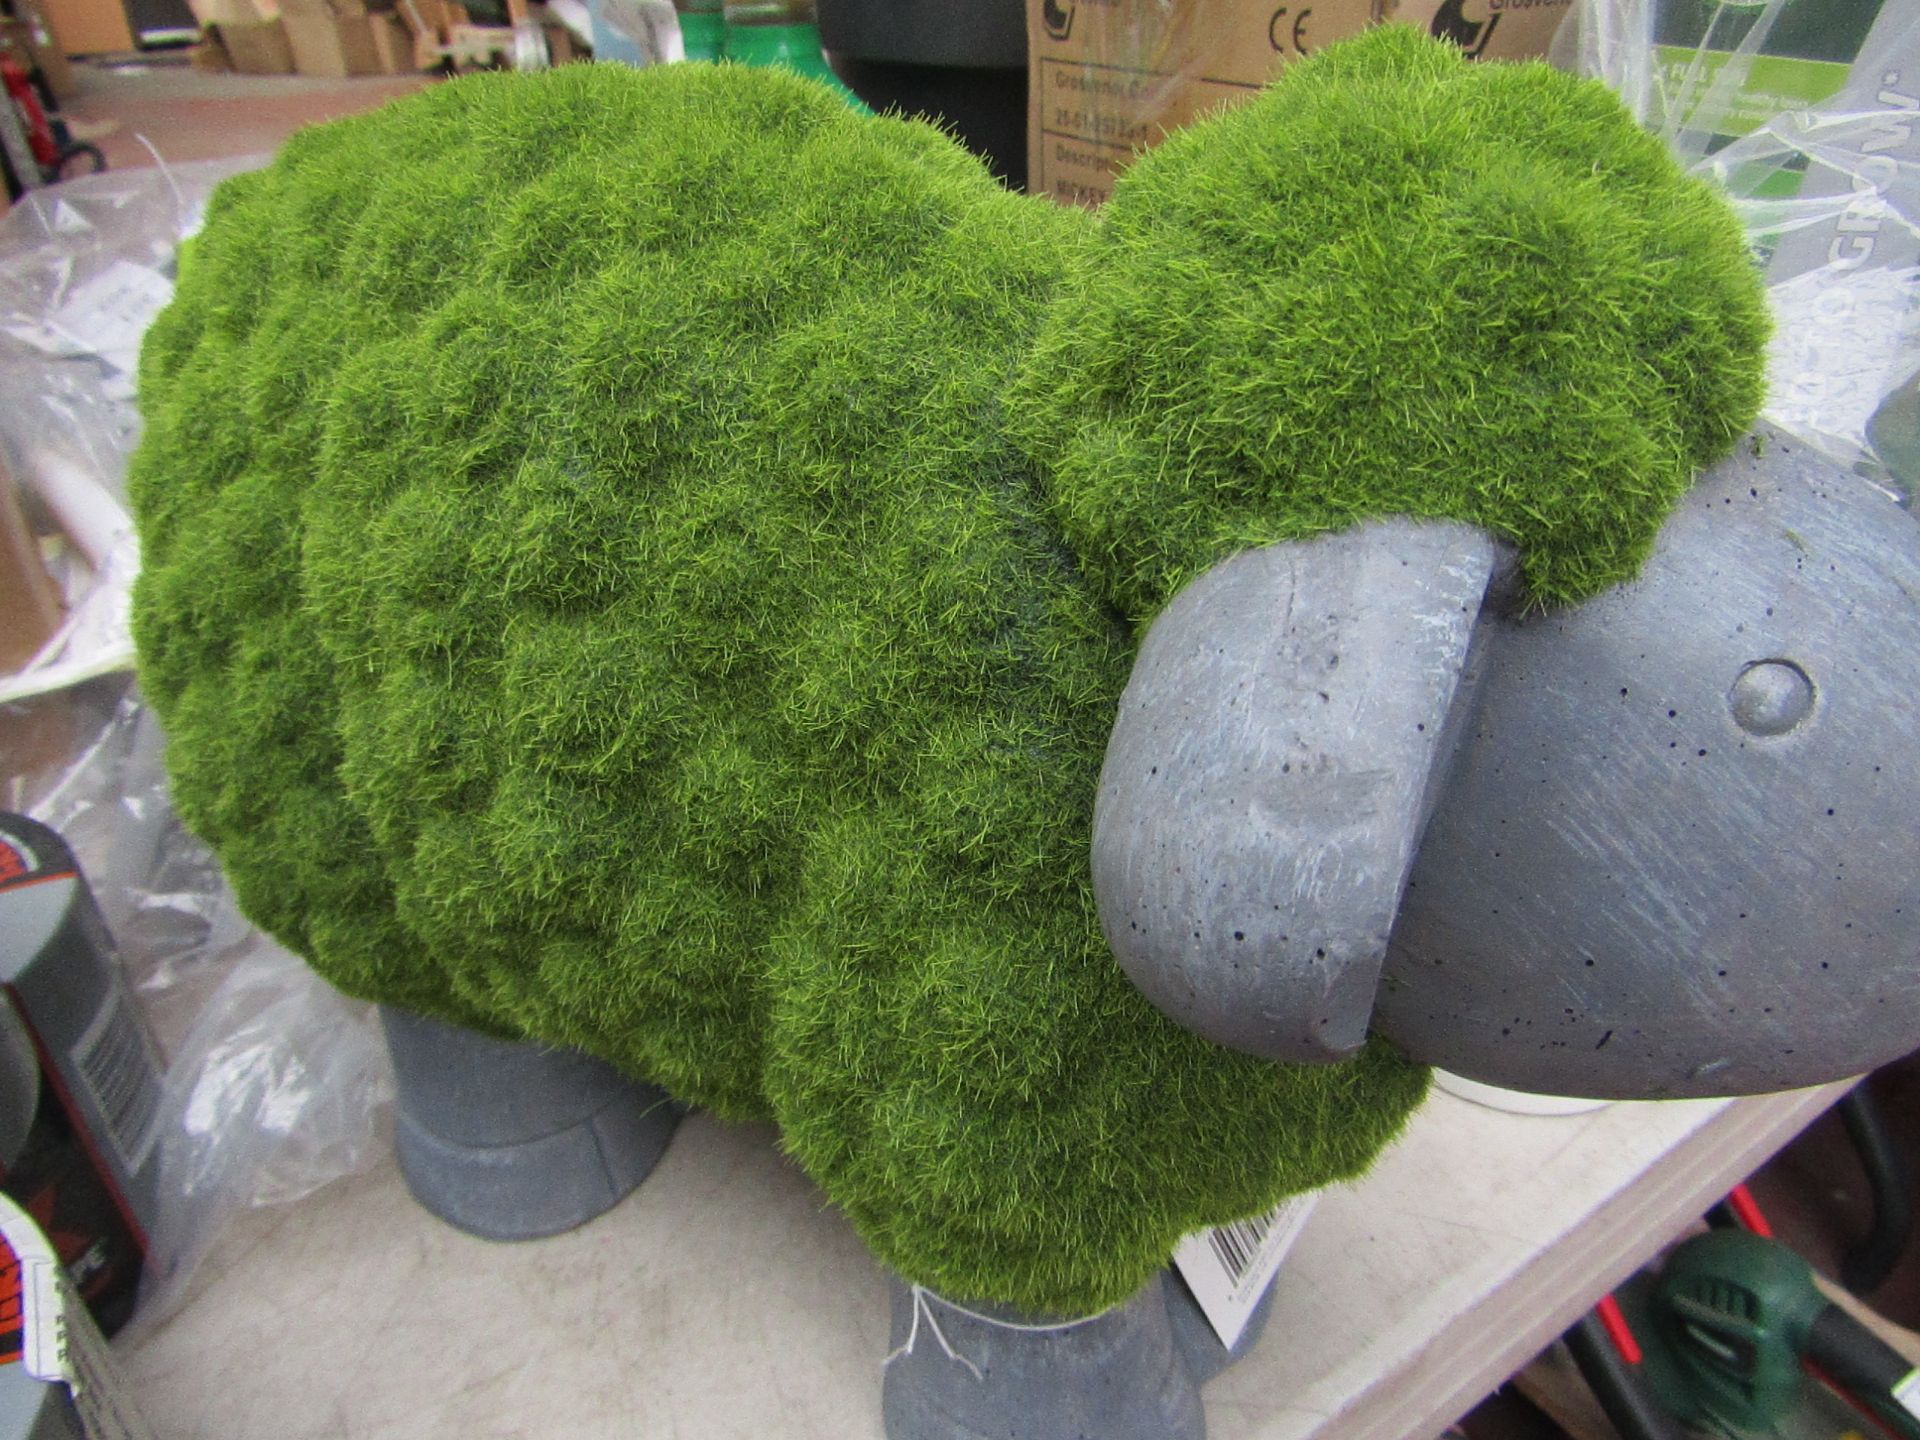 Mossy Sheep Garden Ornament - Good Condition & No Packaging.